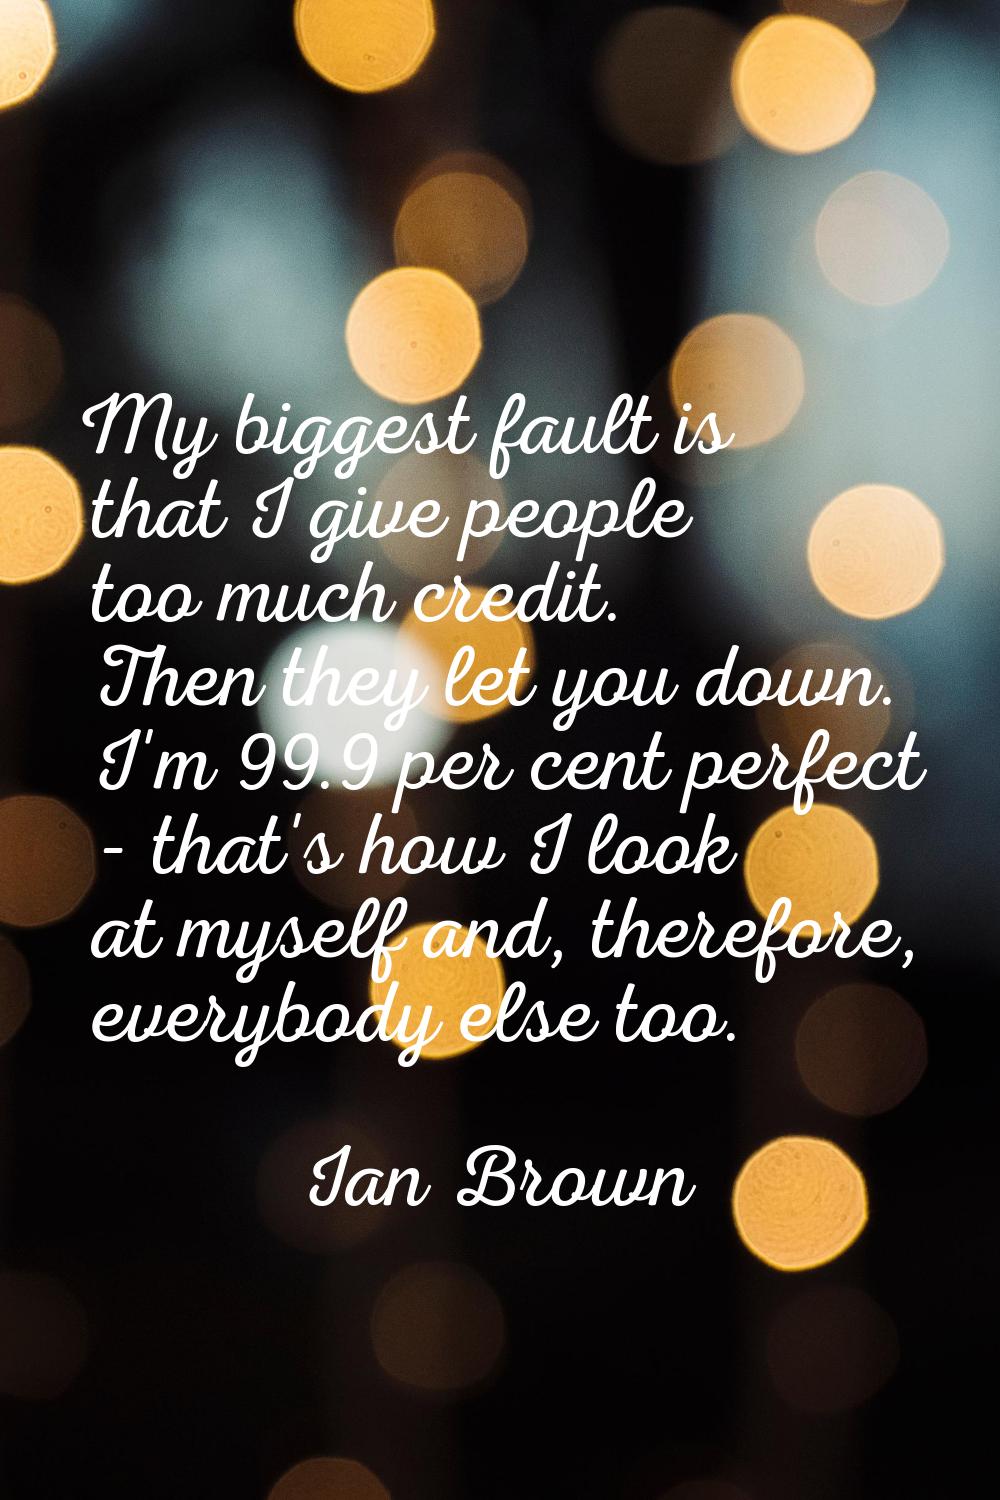 My biggest fault is that I give people too much credit. Then they let you down. I'm 99.9 per cent p